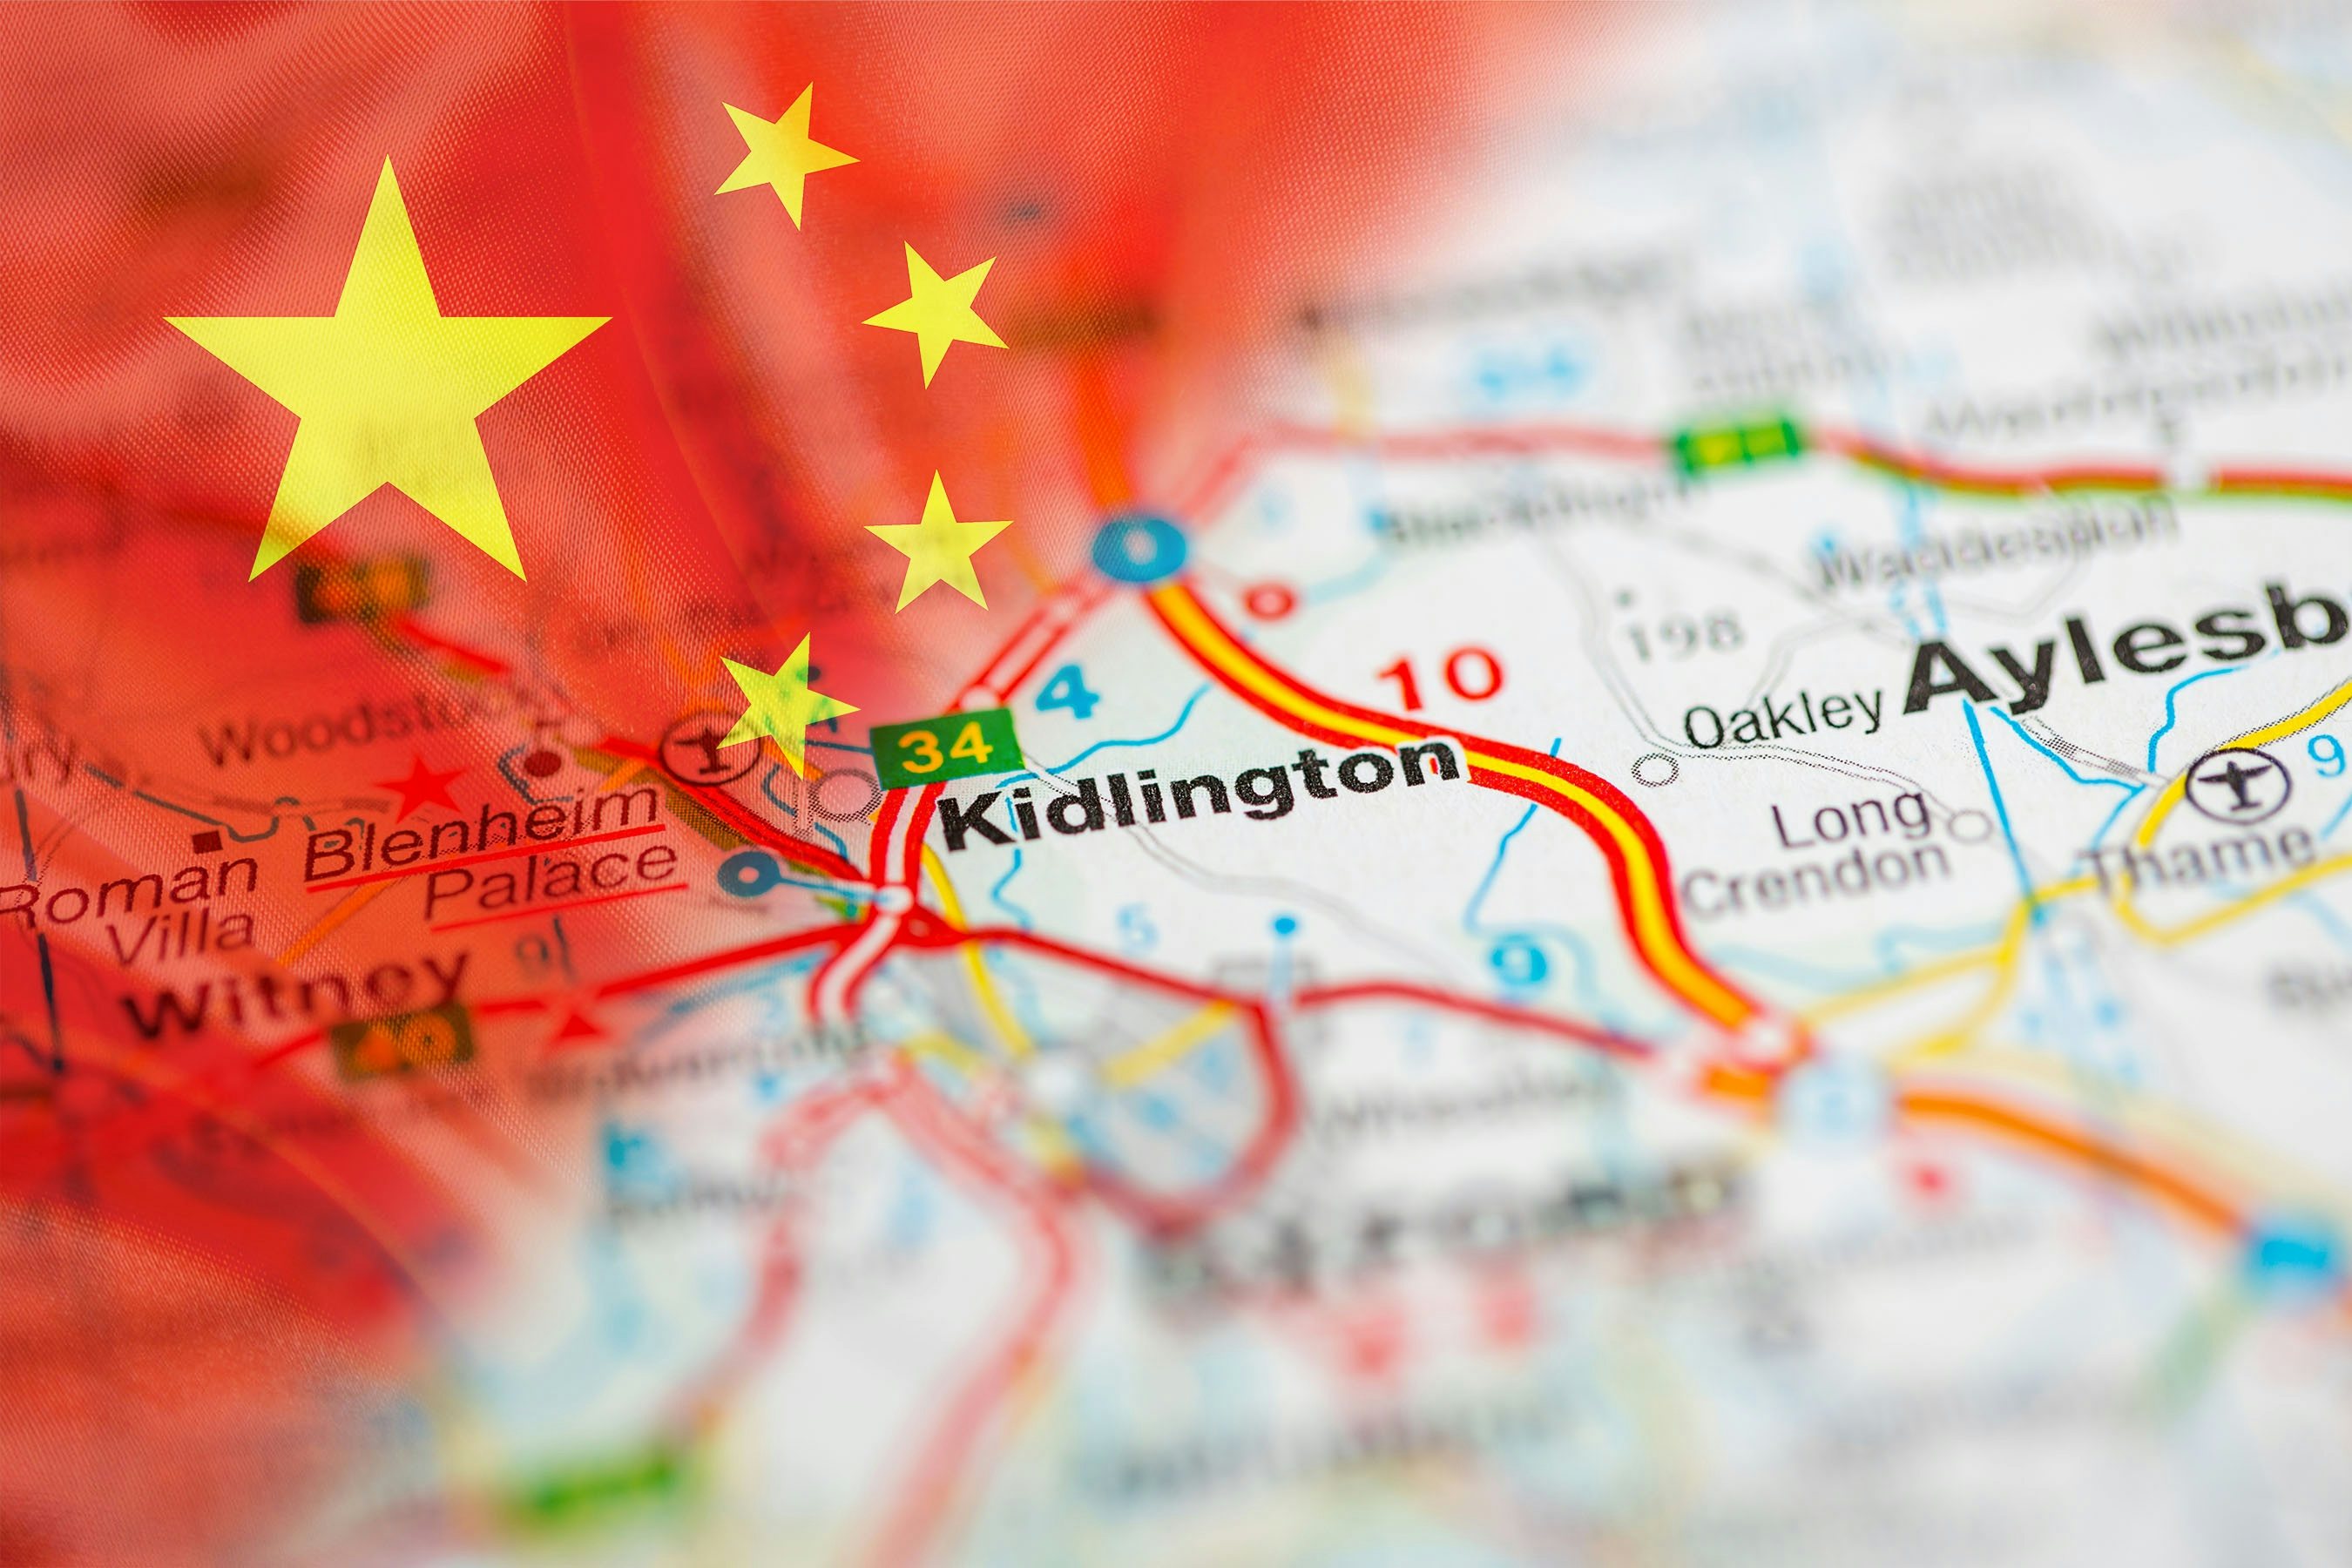 Kidlington is experiencing a completely unexpected Chinese tourism boom. (Daniel William / sevenMaps7 / Shutterstock.com)